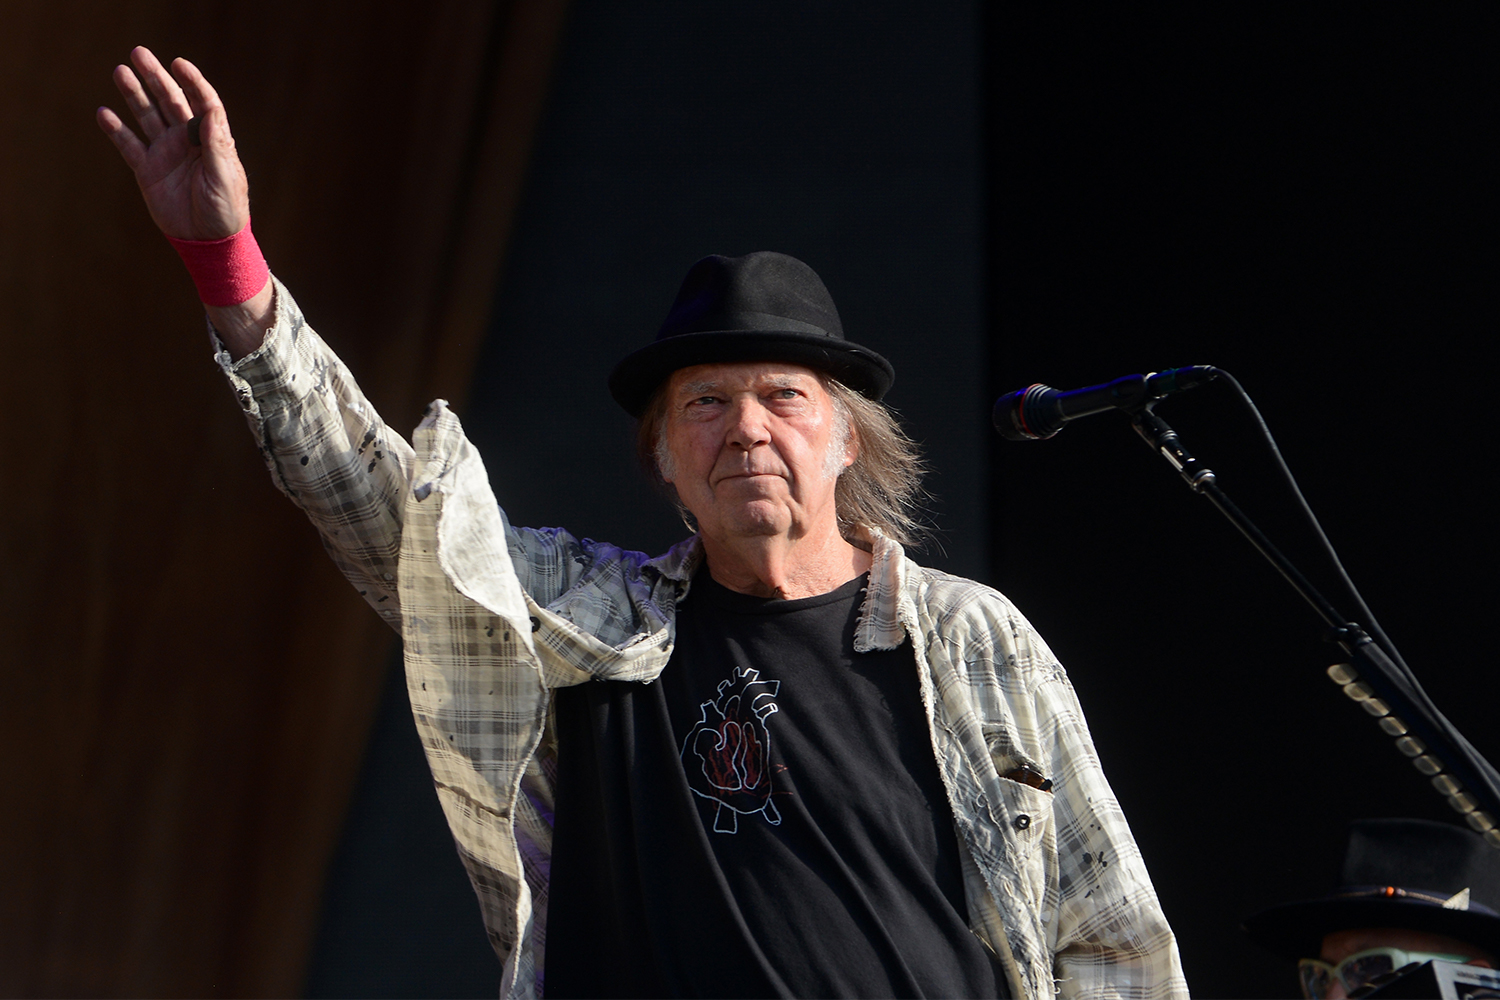 Neil Young performs on stage in Hyde Park on July 12, 2019 in London, England